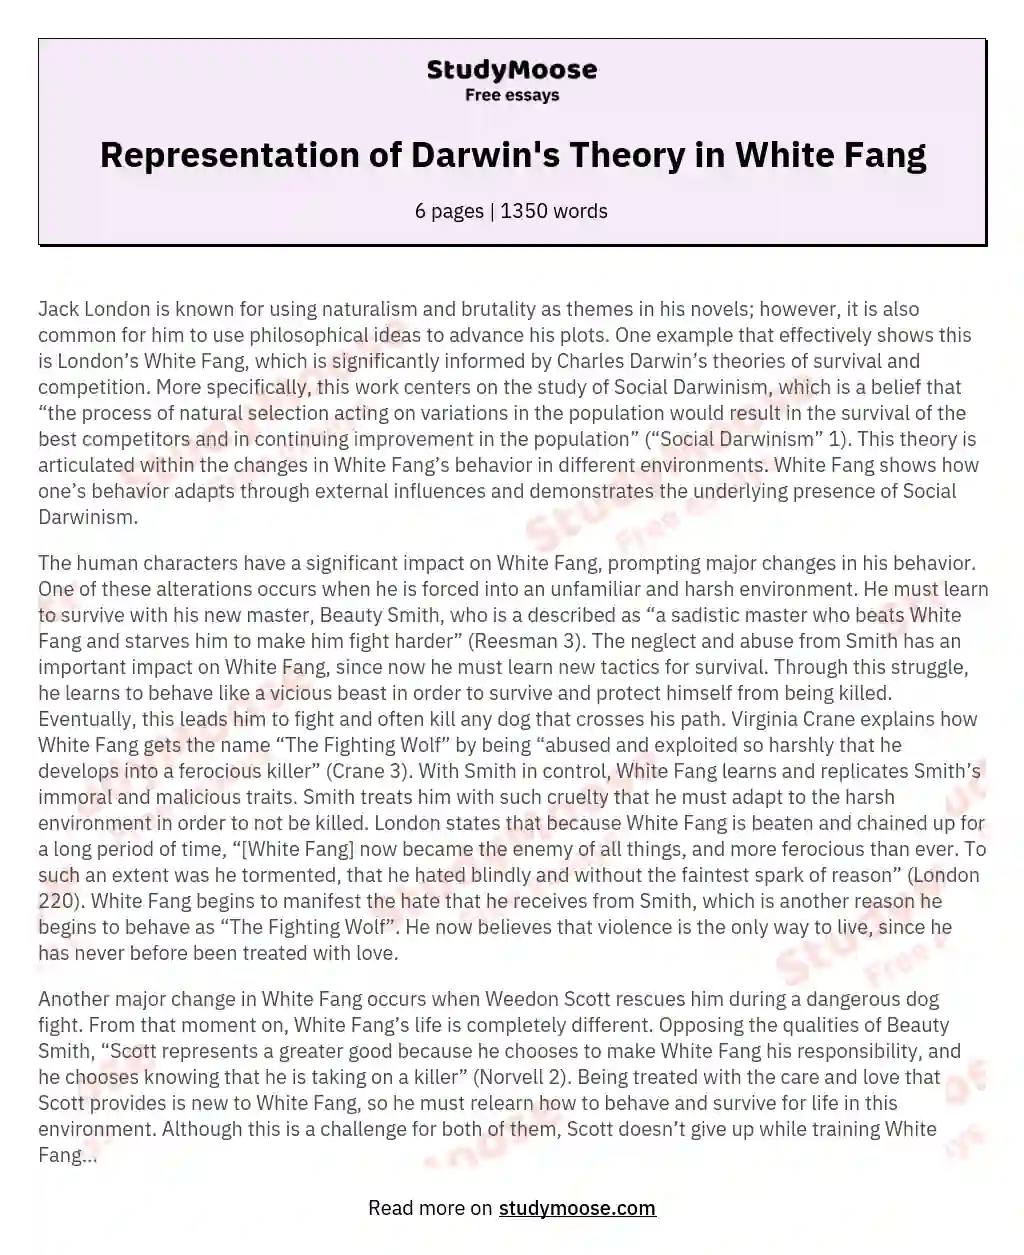 Representation of Darwin's Theory in White Fang essay